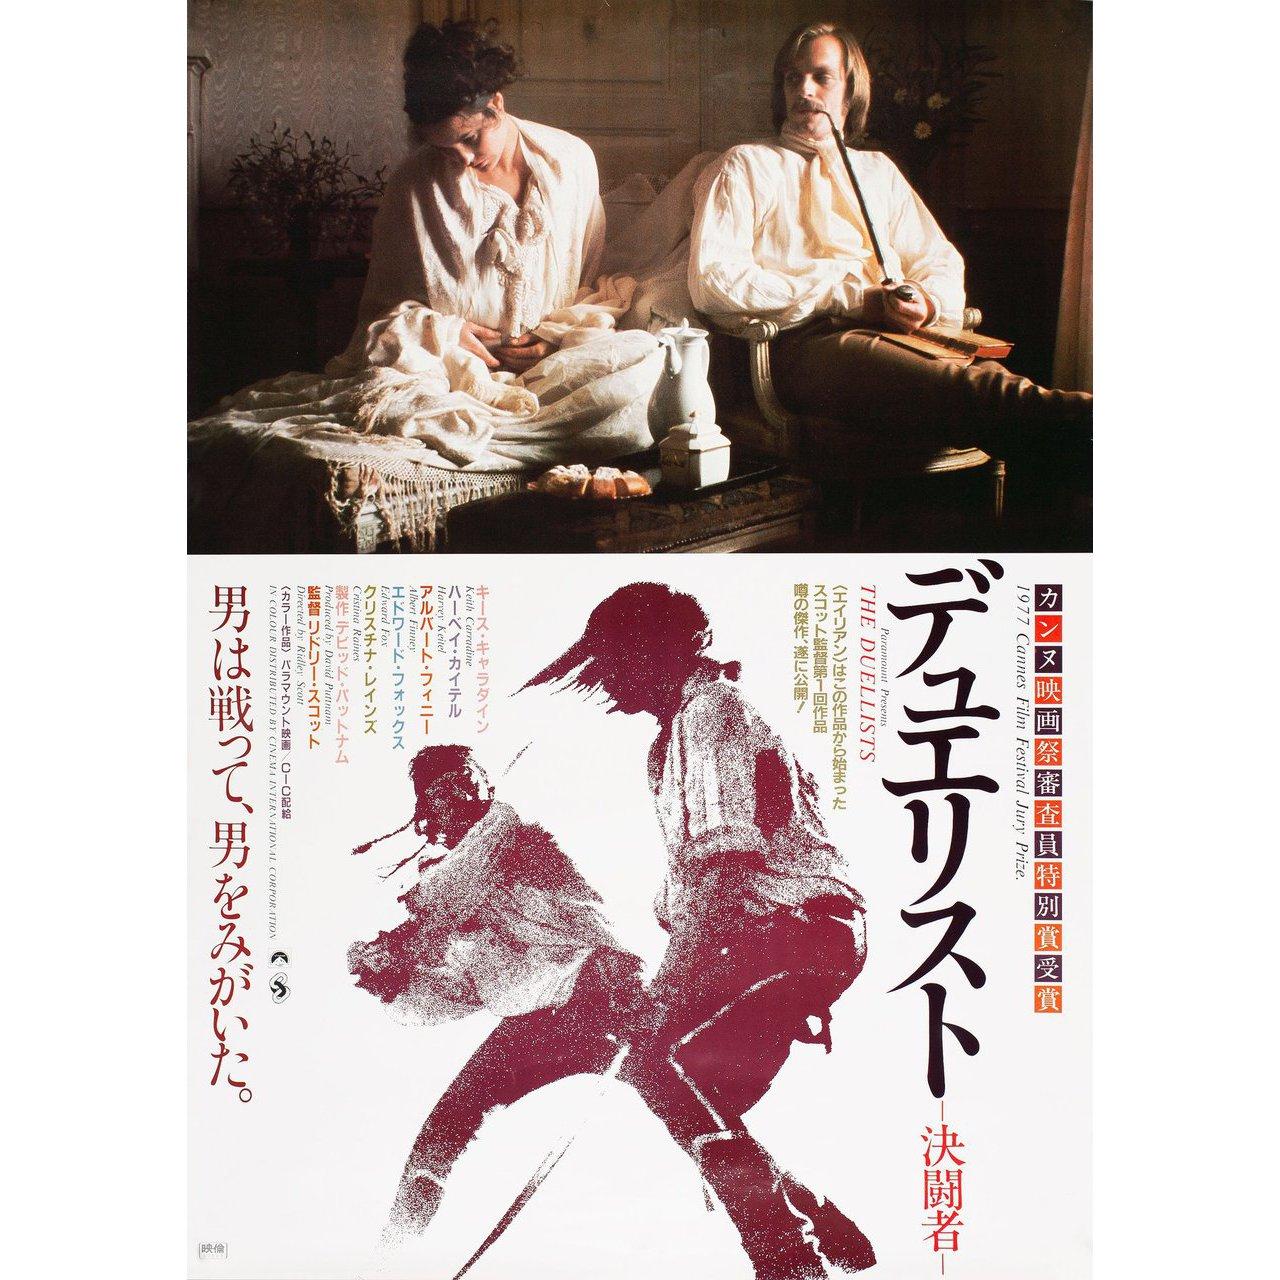 Original 1982 Japanese B2 poster for the 1977 film The Duellists directed by Ridley Scott with Keith Carradine / Harvey Keitel / Albert Finney / Edward Fox. Very Good-Fine condition, rolled. Please note: the size is stated in inches and the actual